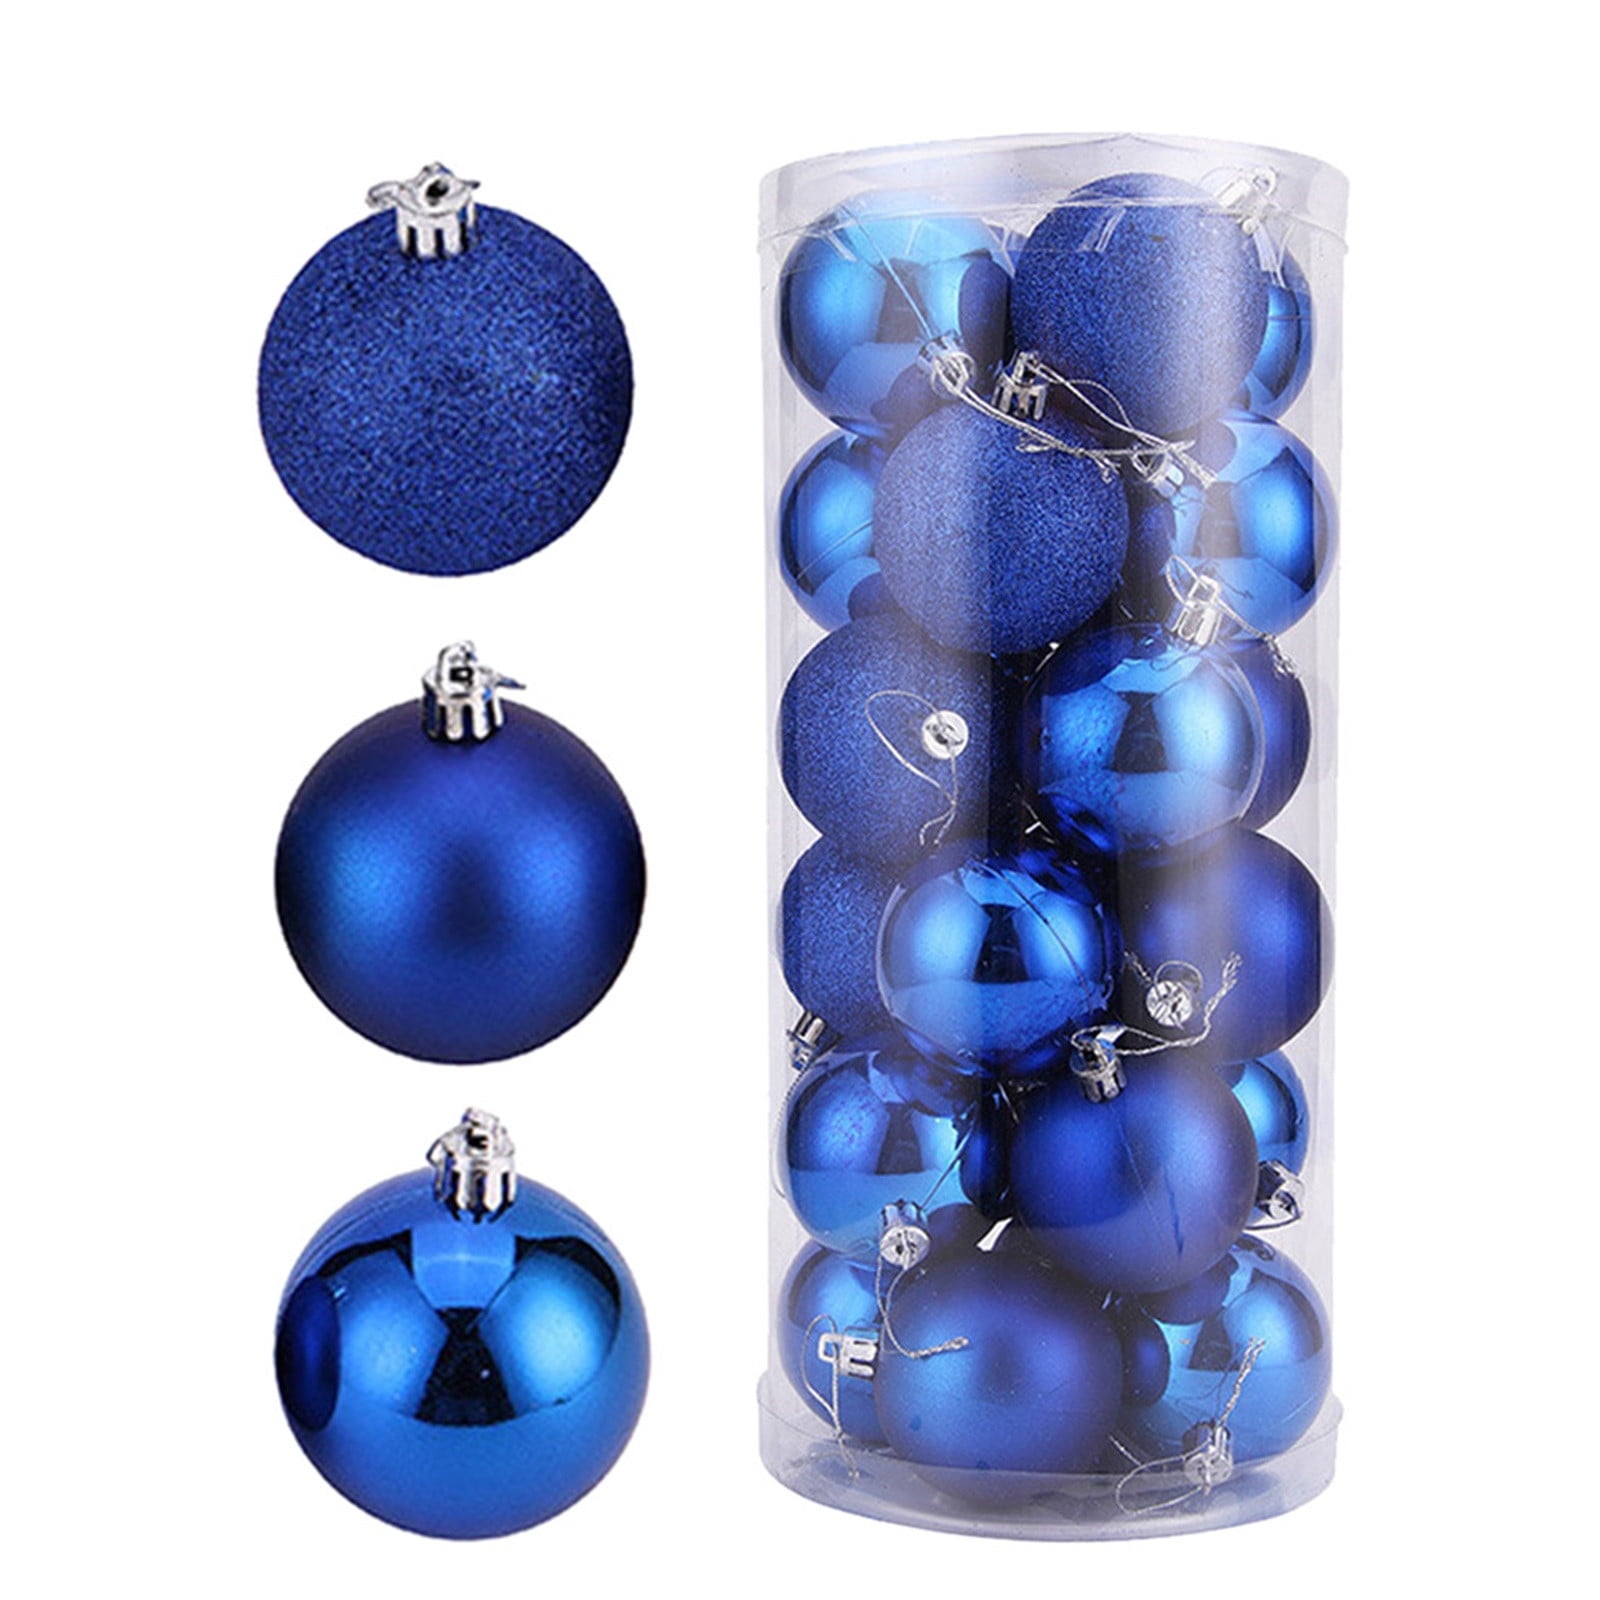 Minimalist Christmas Decorations Clearance for Simple Design